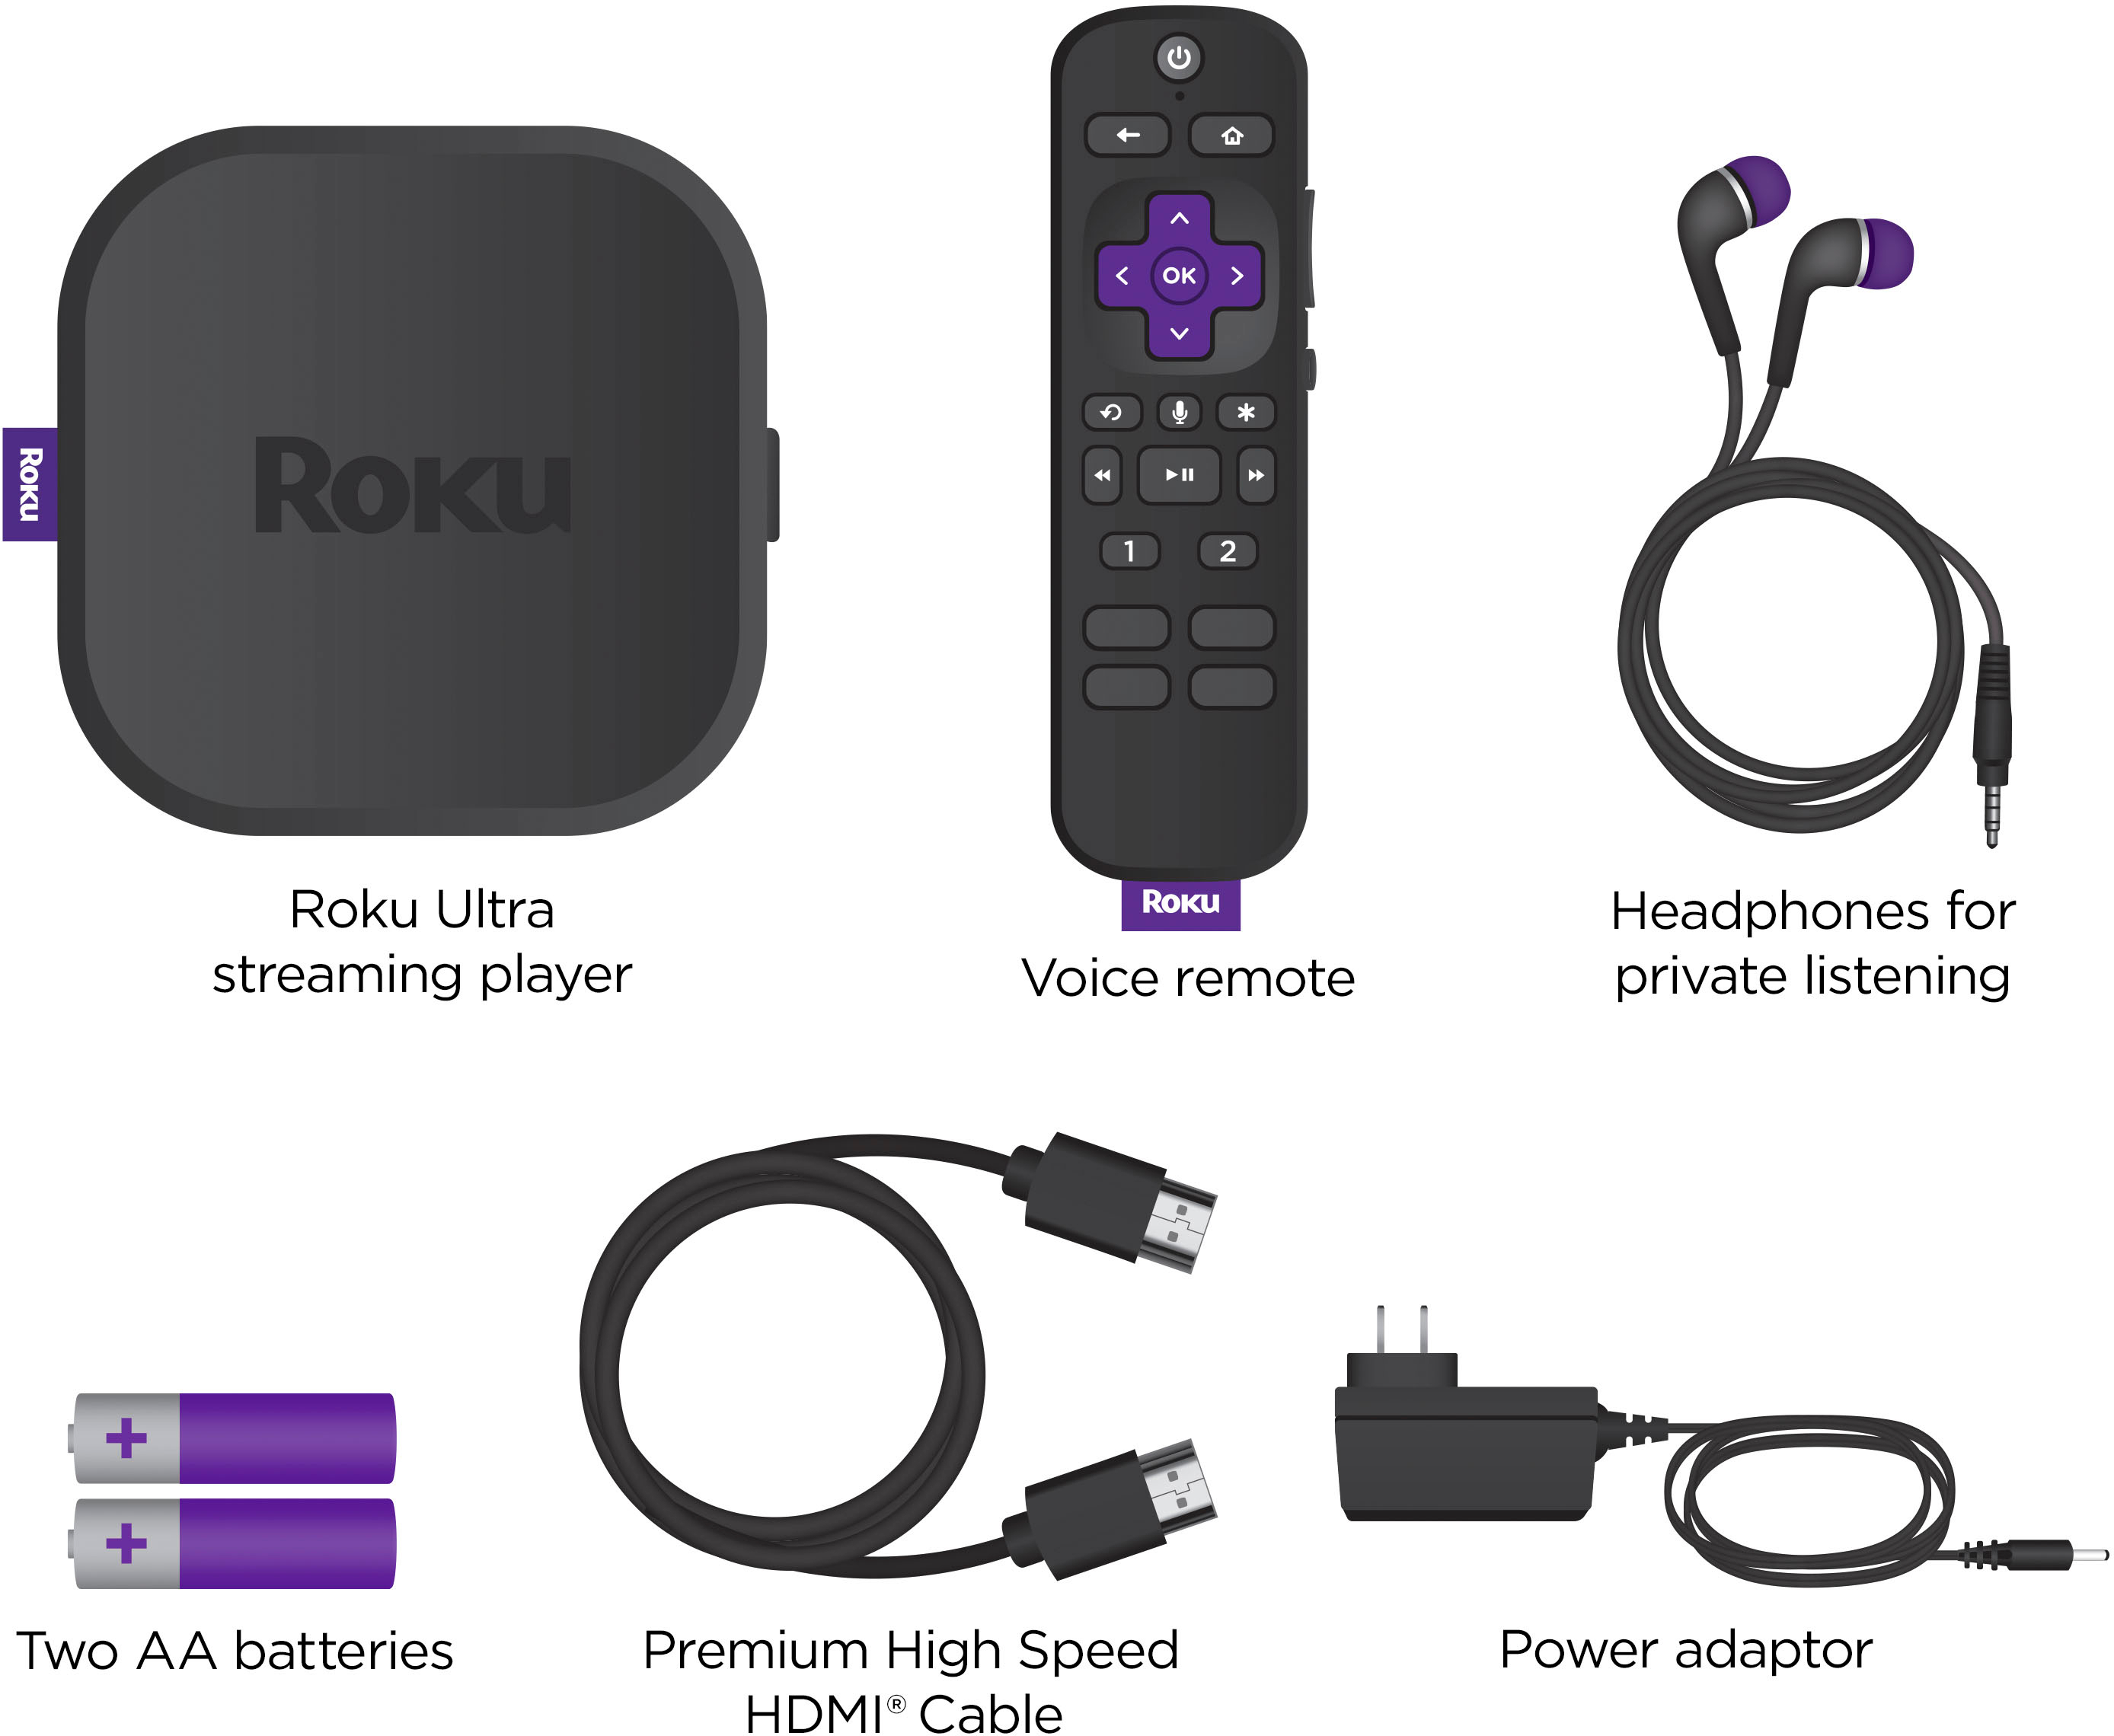 Best Buy: Roku Ultra Streaming Device 4K/HDR/Dolby Vision, Voice Remote with Headphone Lost Remote Finder Black 4800R